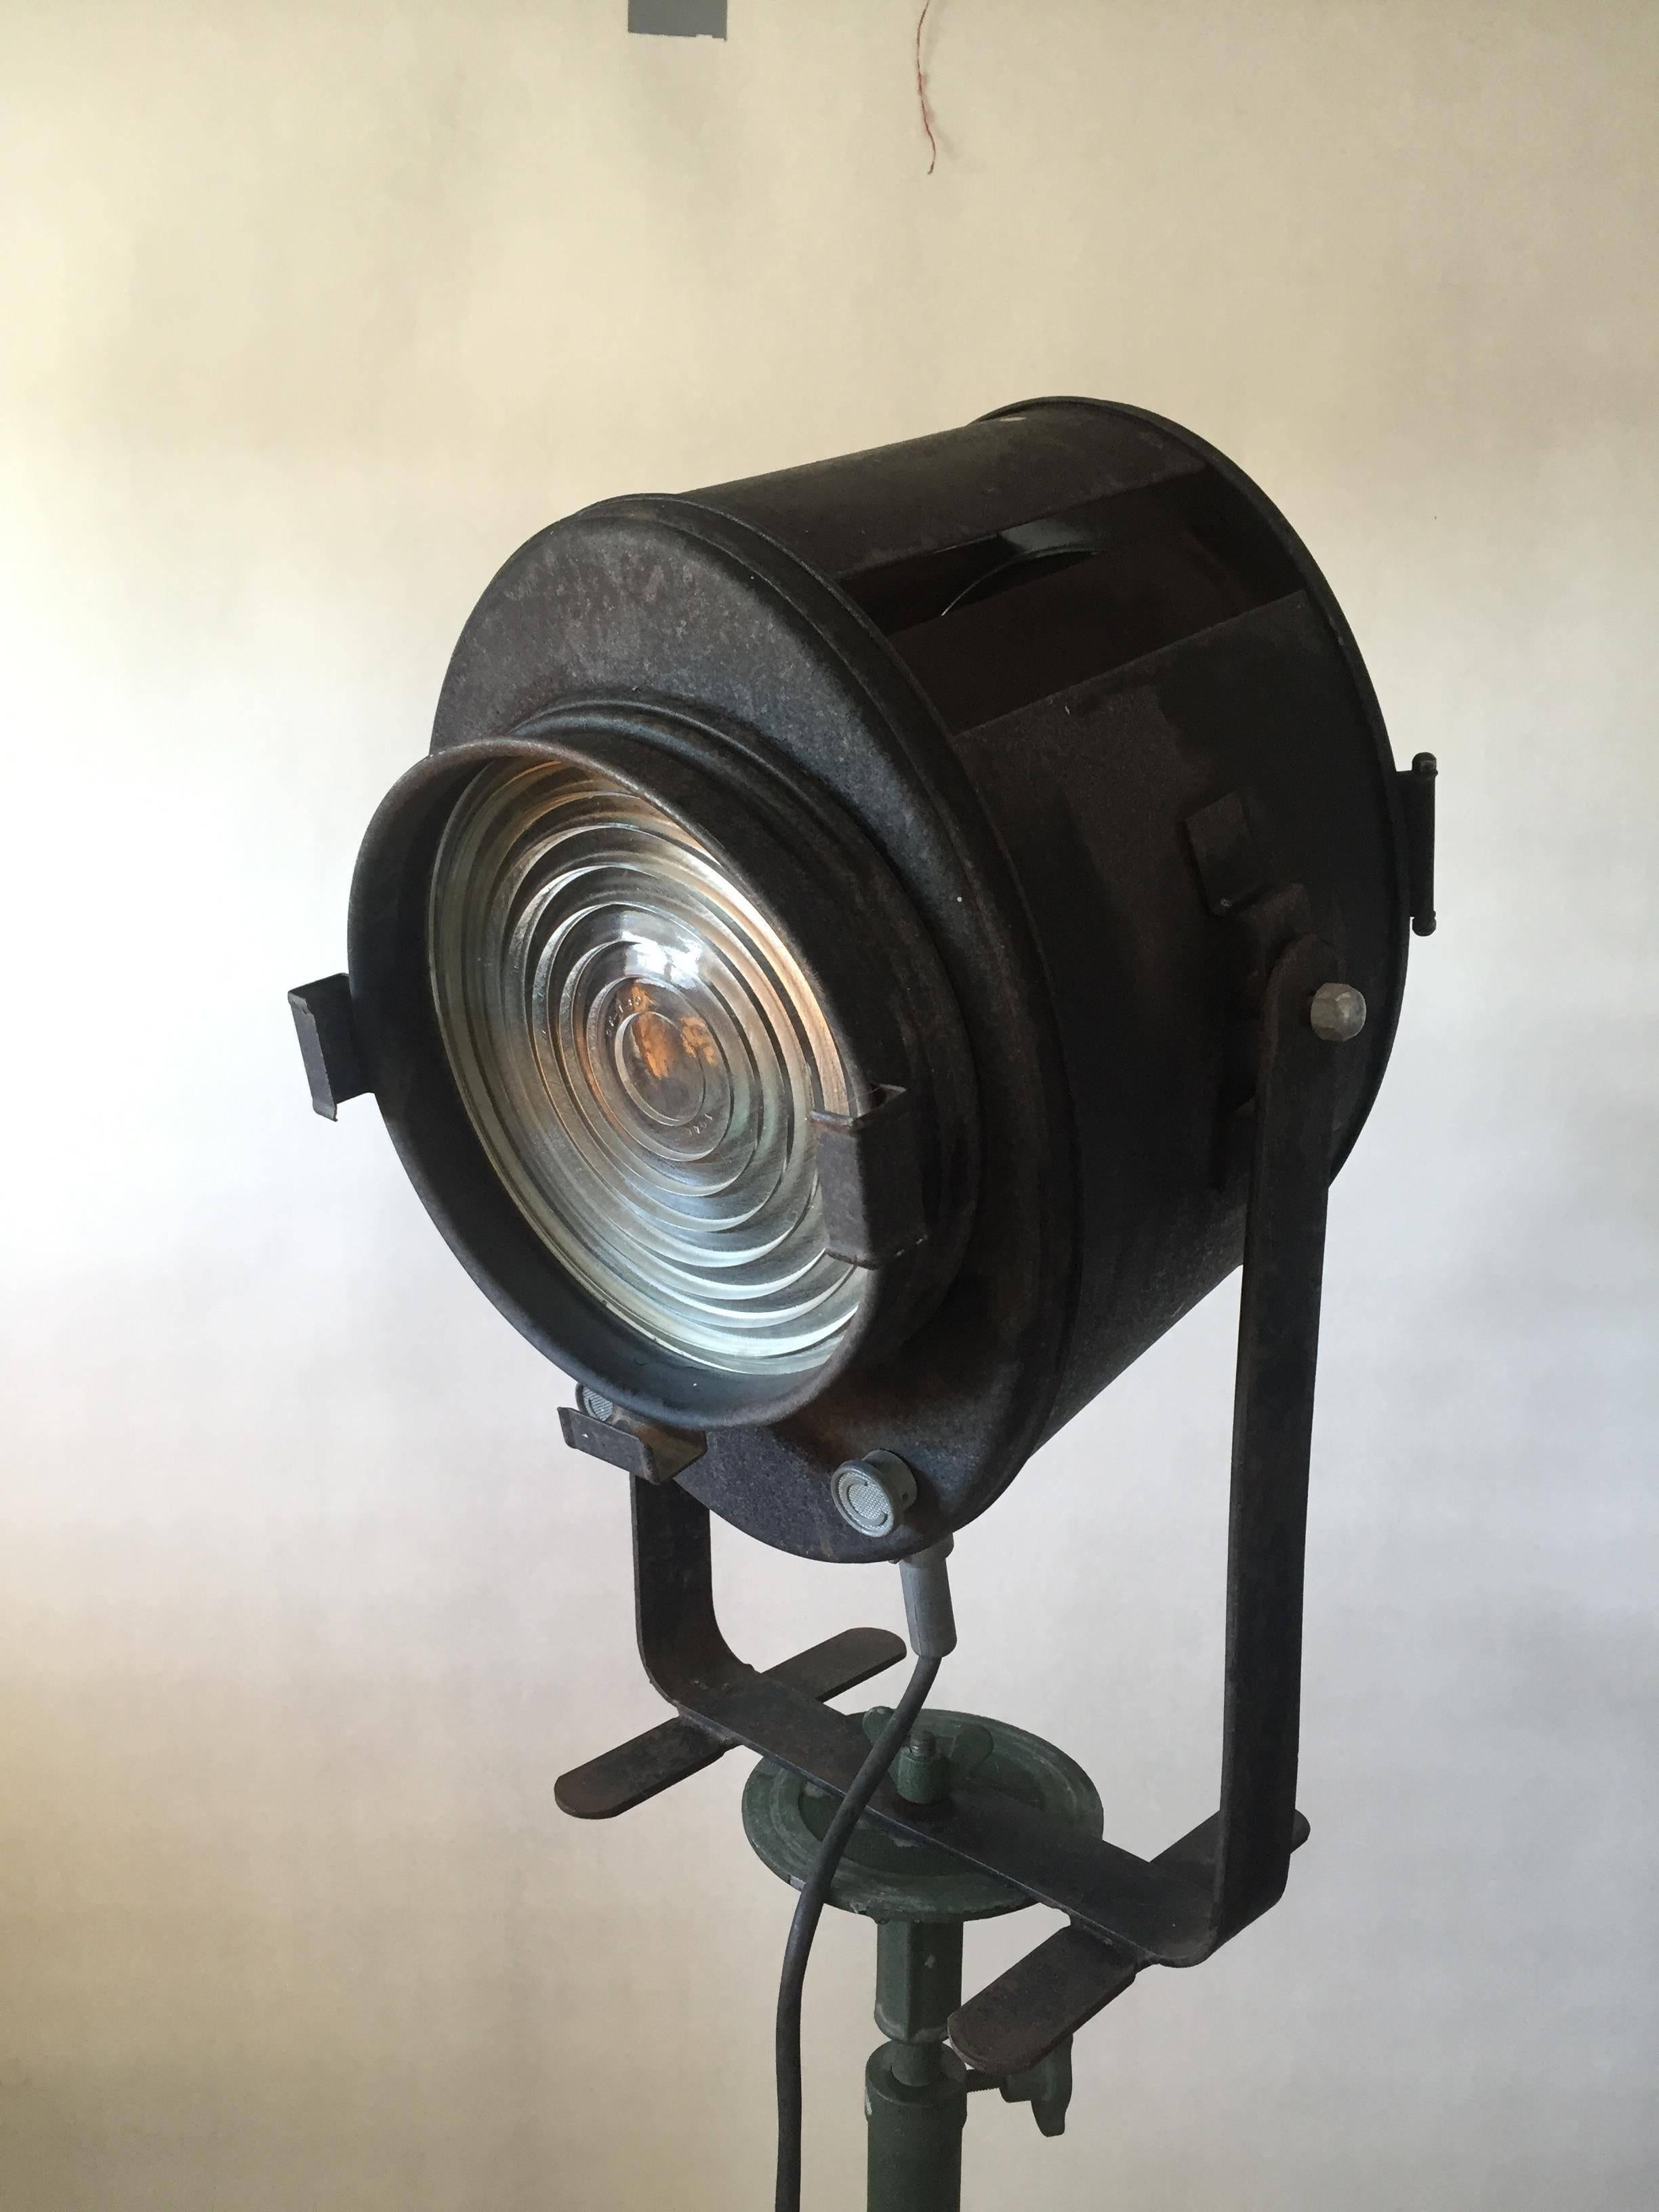 1925 AE Cremer Paris studio lamp
A original nice working studio movie spotlight mounted on a metal stand with wheels and adjustable height. All the mechanic features, zoom and diameter of the light cone, works without any problems and the original